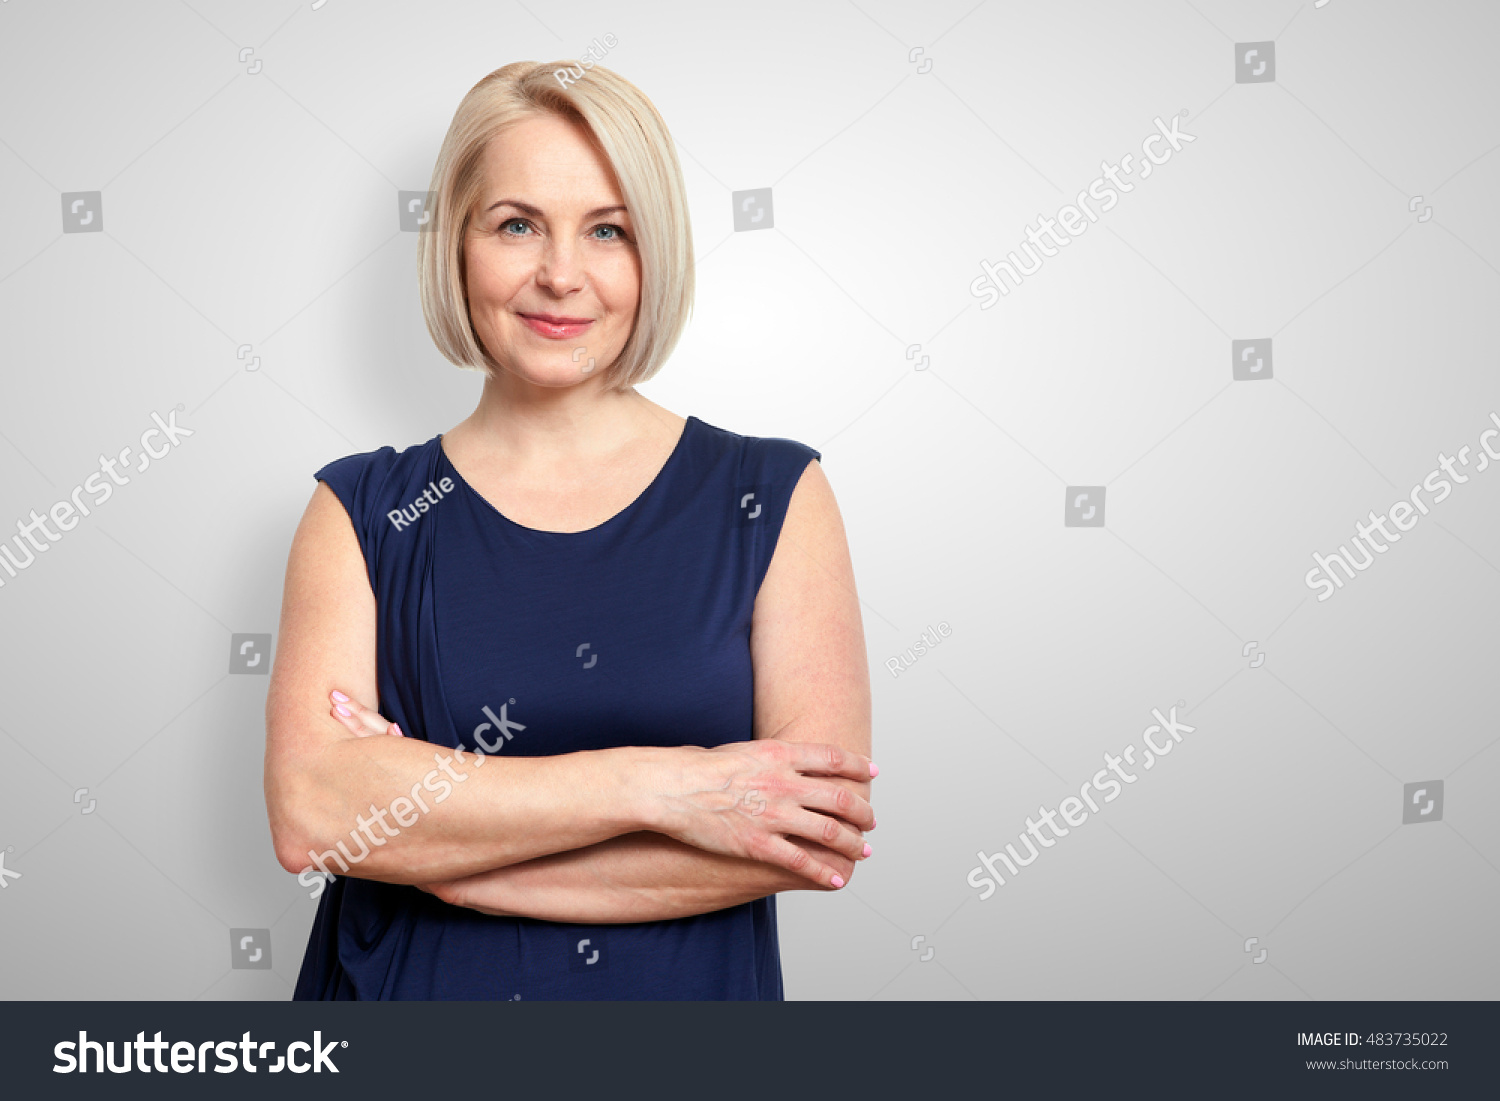 Attractive middle aged woman with folded arms on grey background #483735022